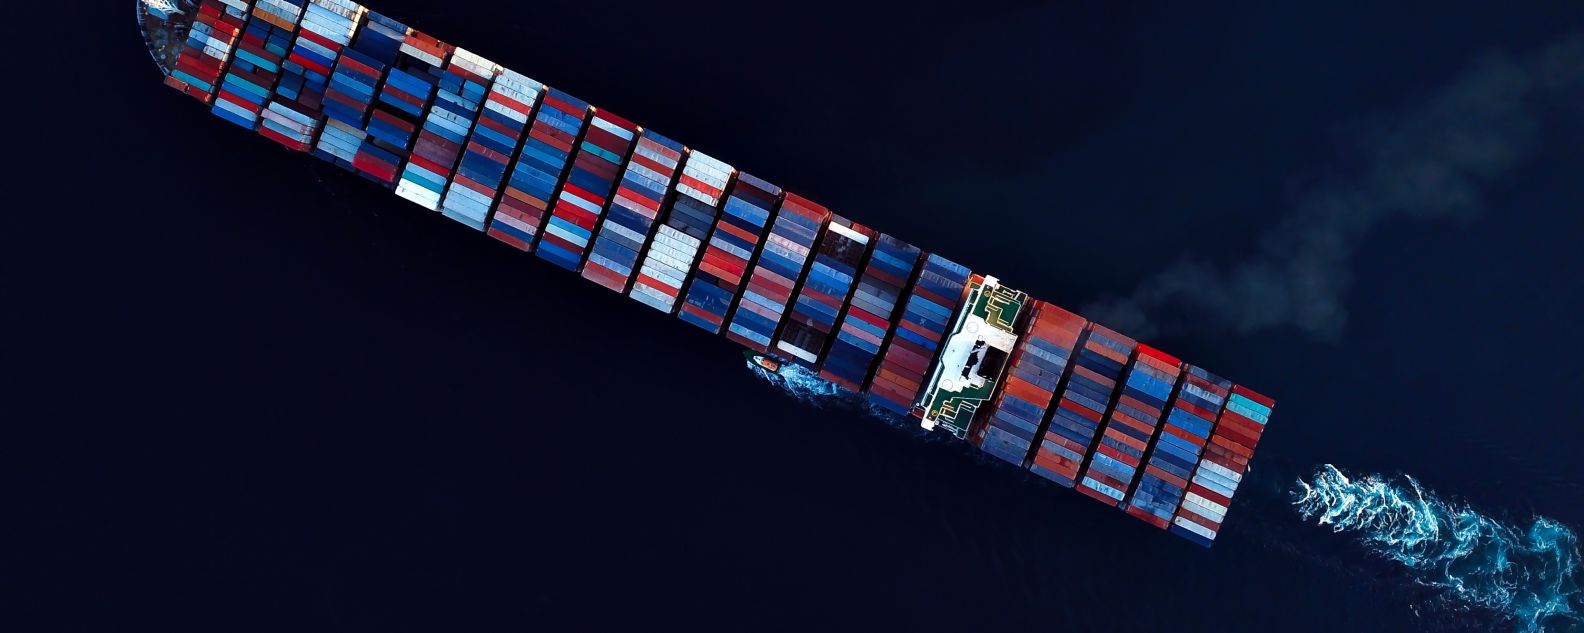 Aerial view of cargo ship on the ocean carrying containers